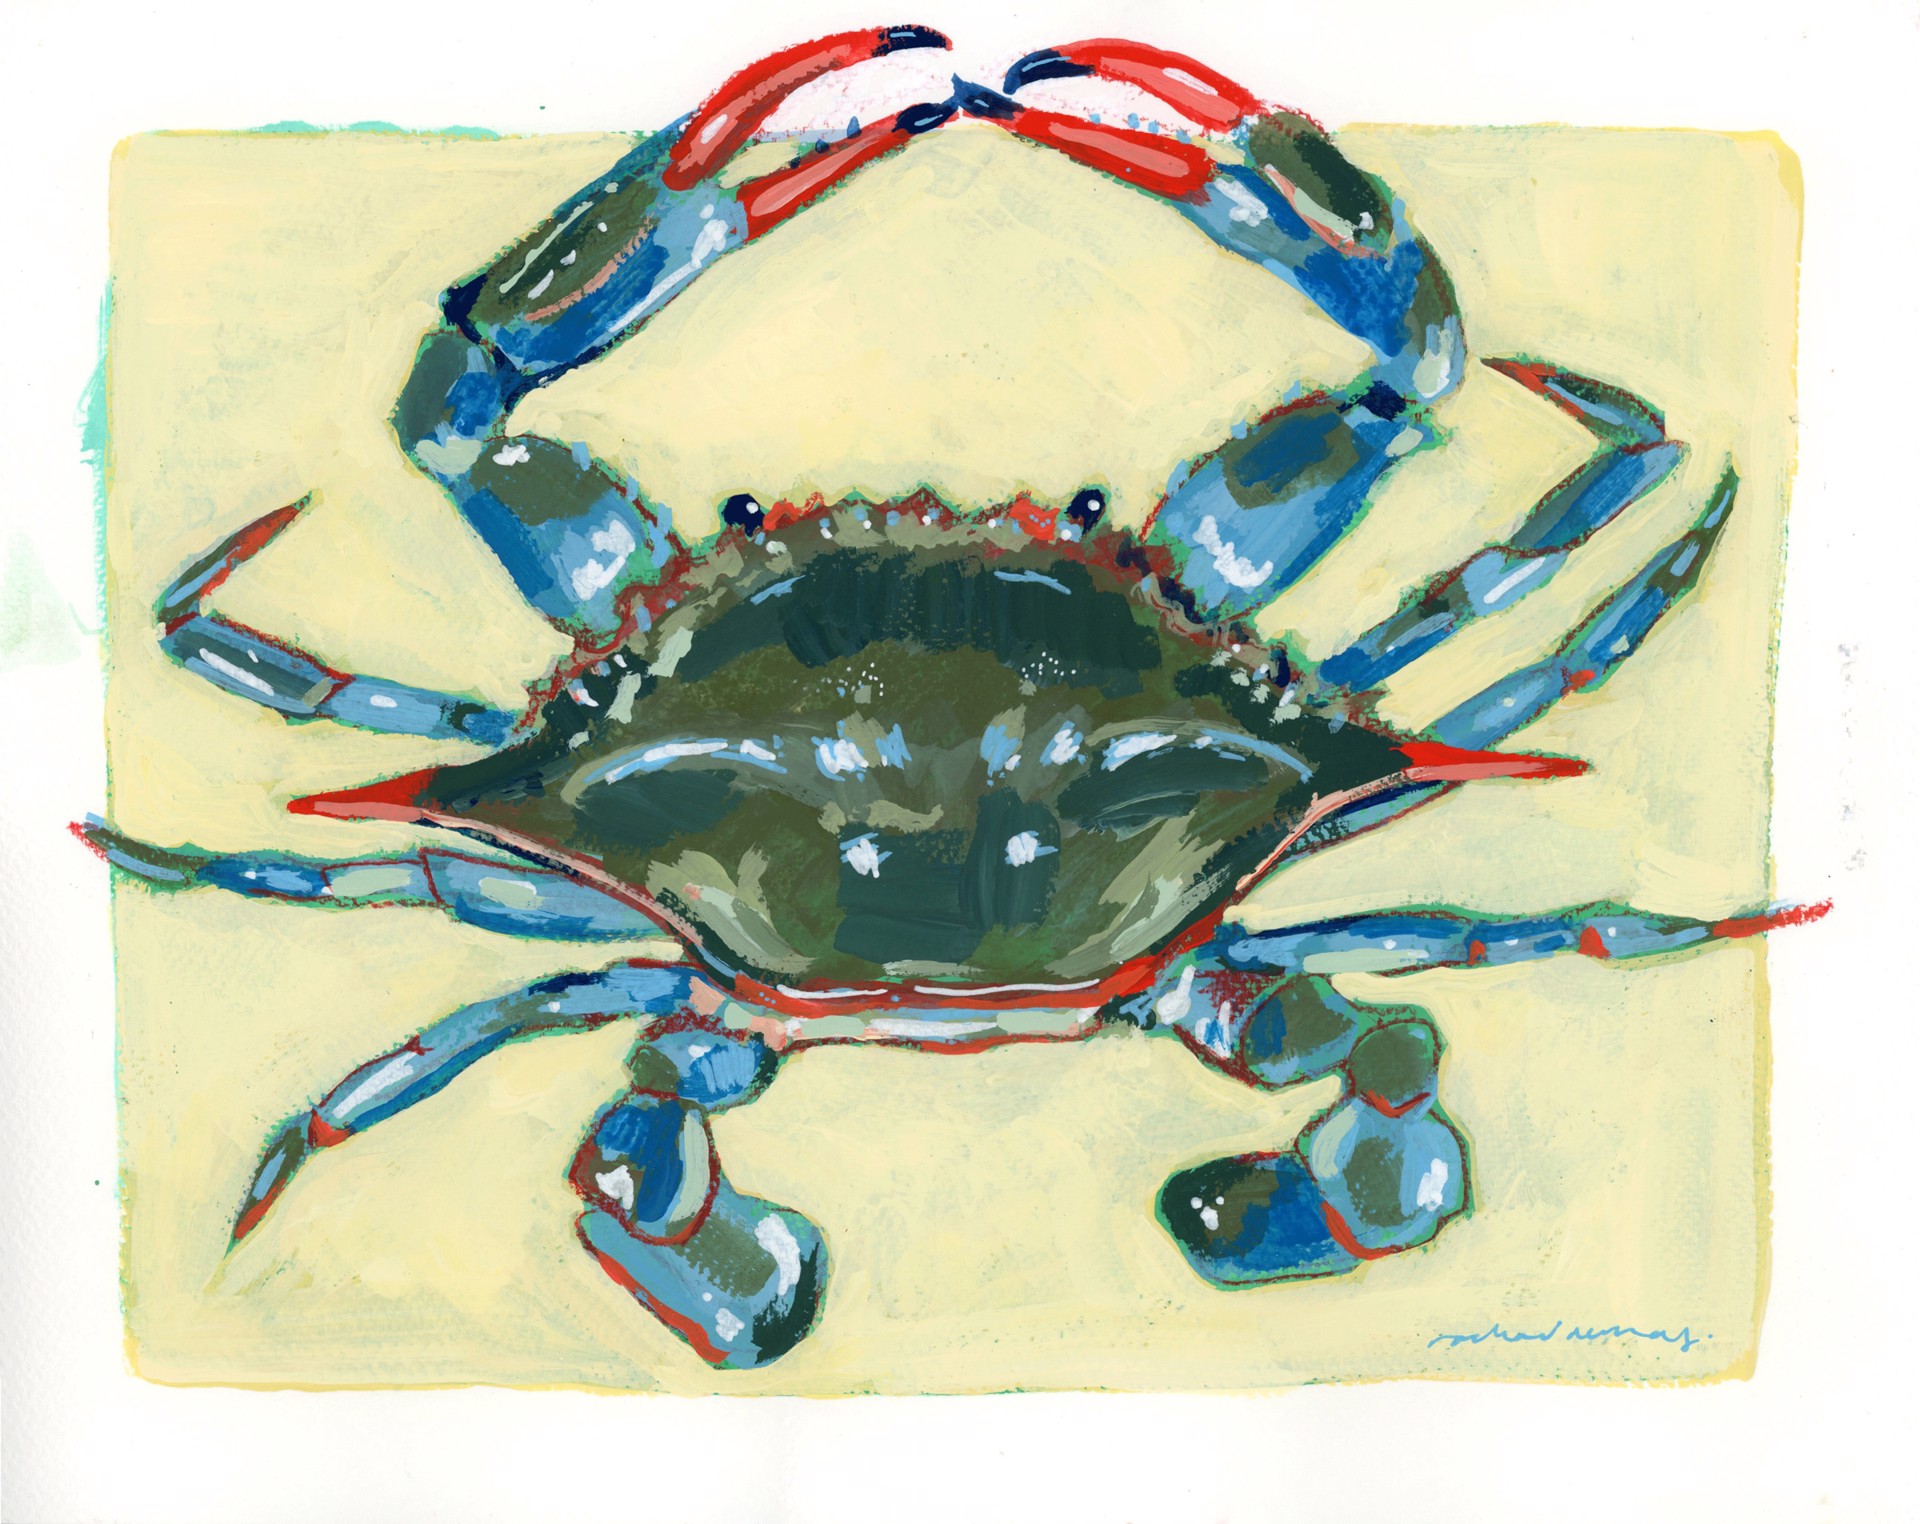 Blue Crab by Rachael Nerney